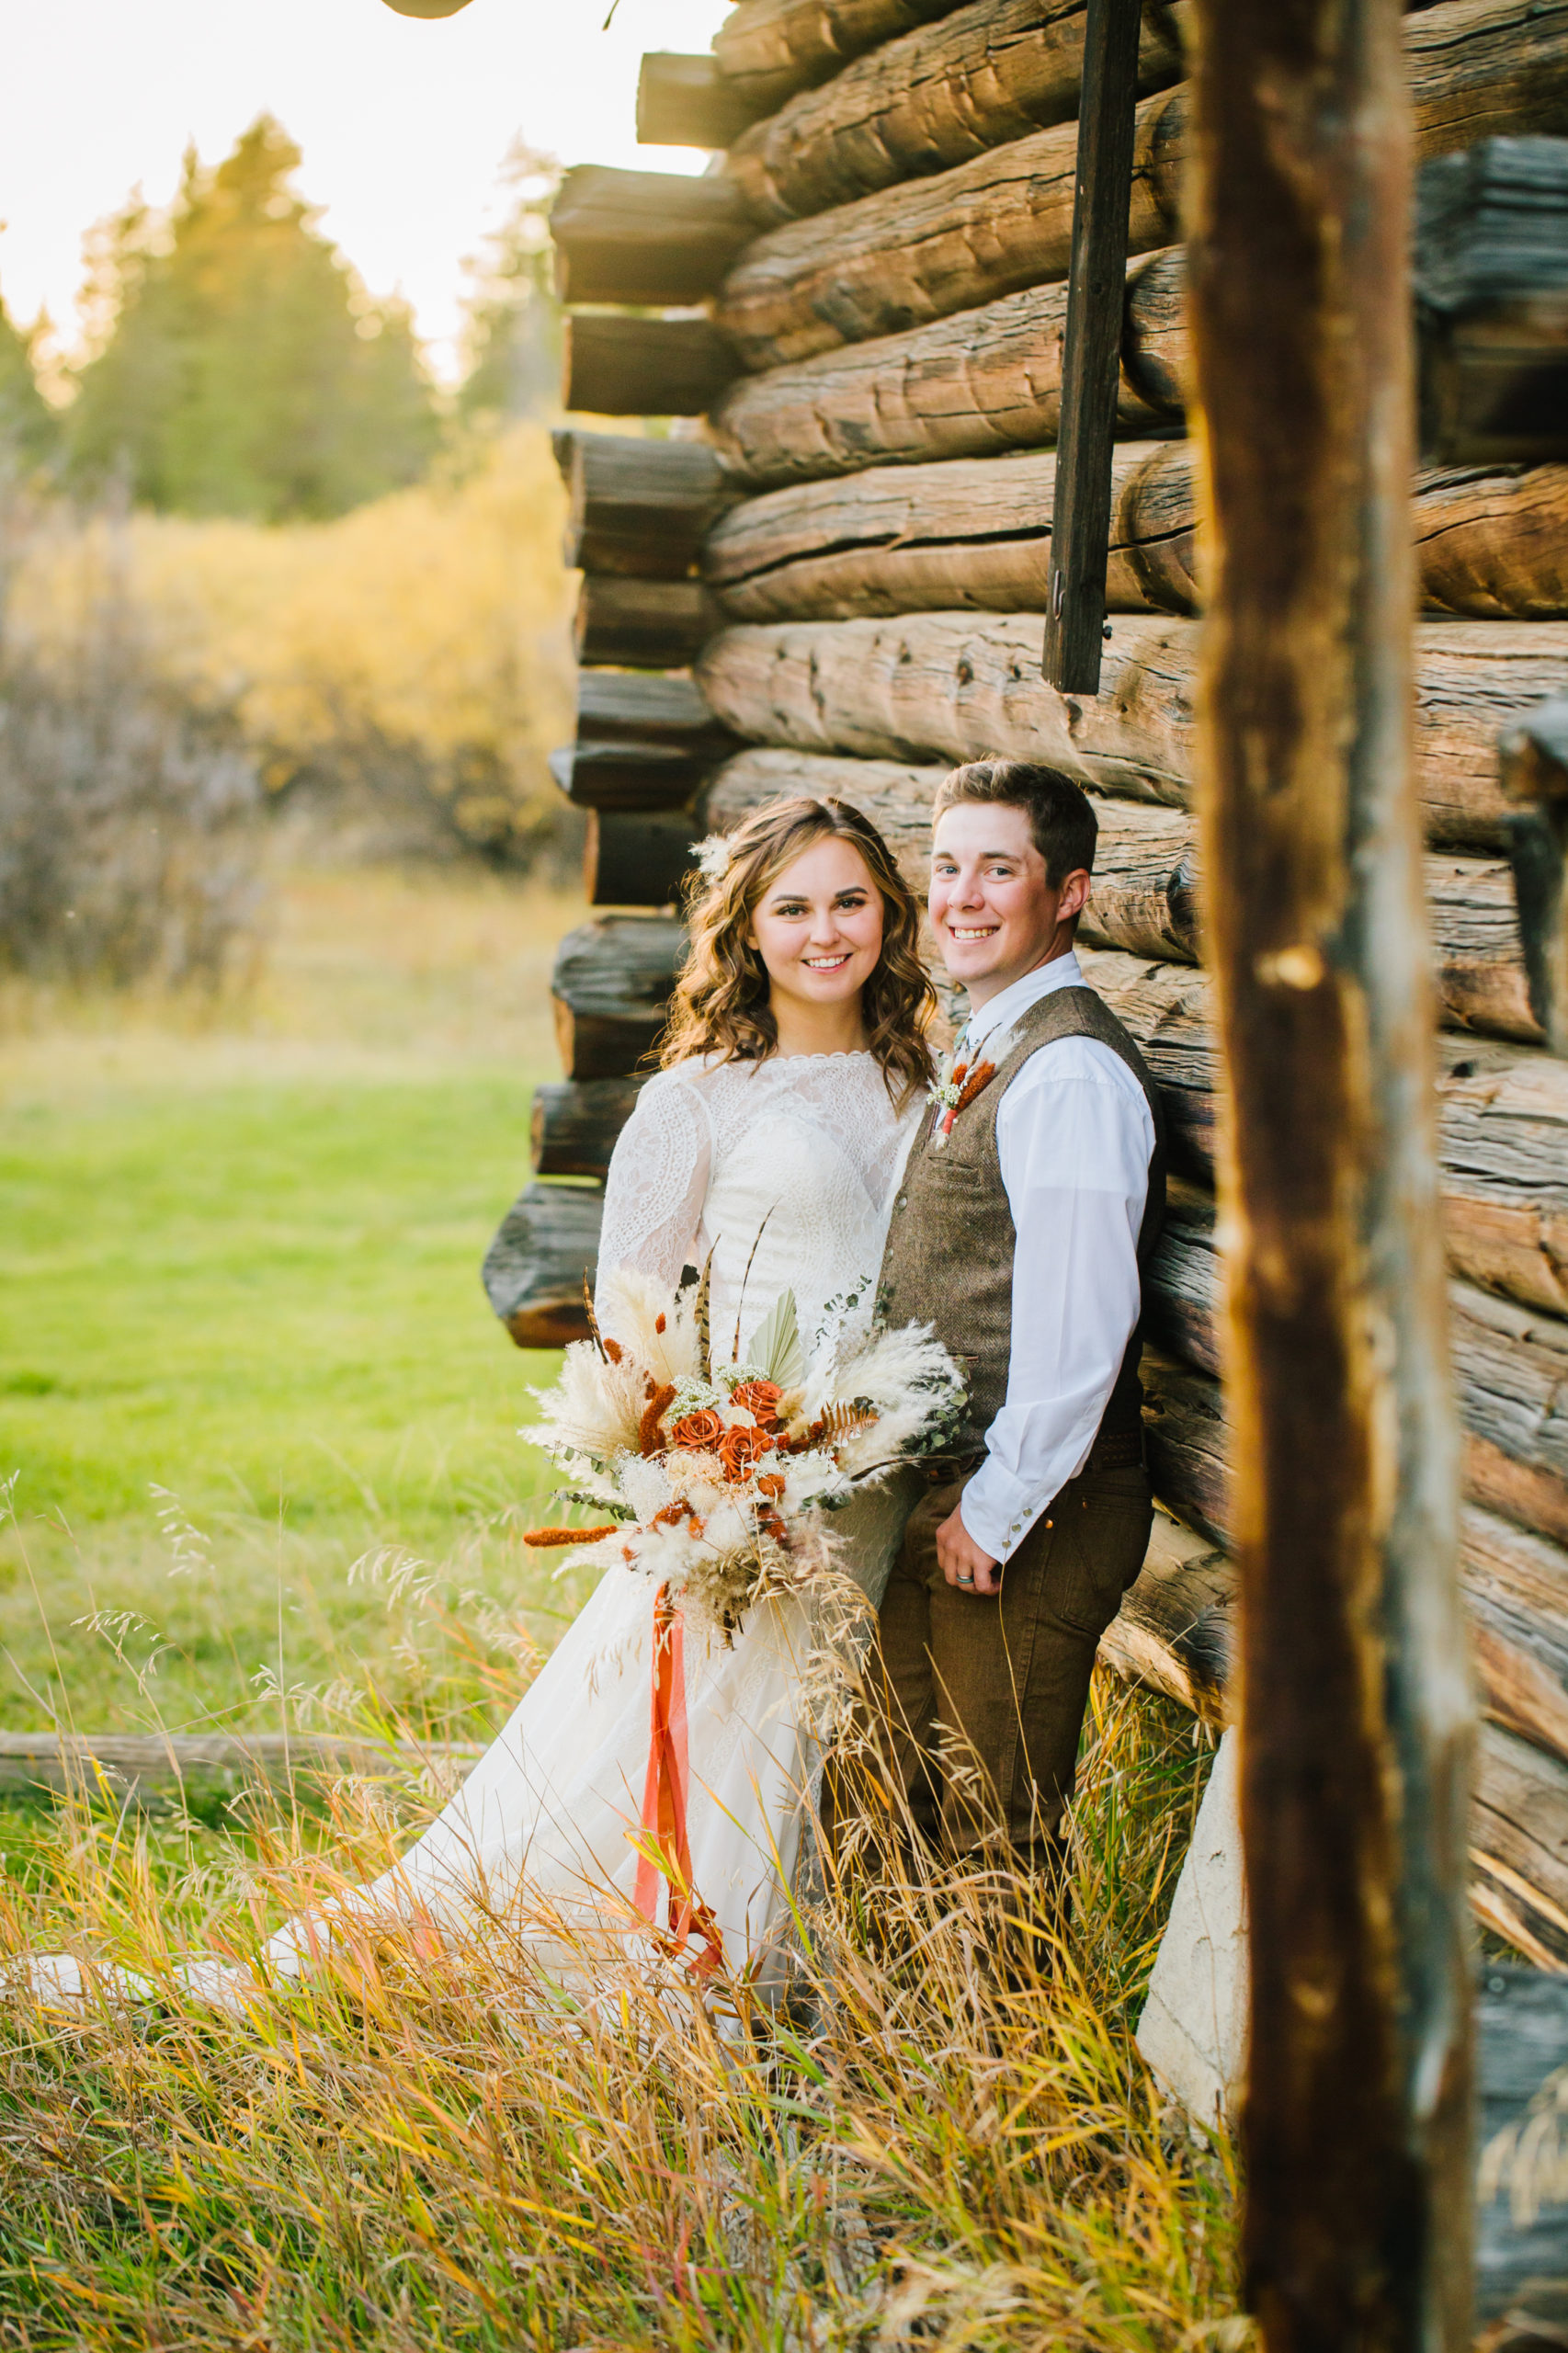 bride and groom standing together att their outdoor wedding venue in Yellowstone in the fall 